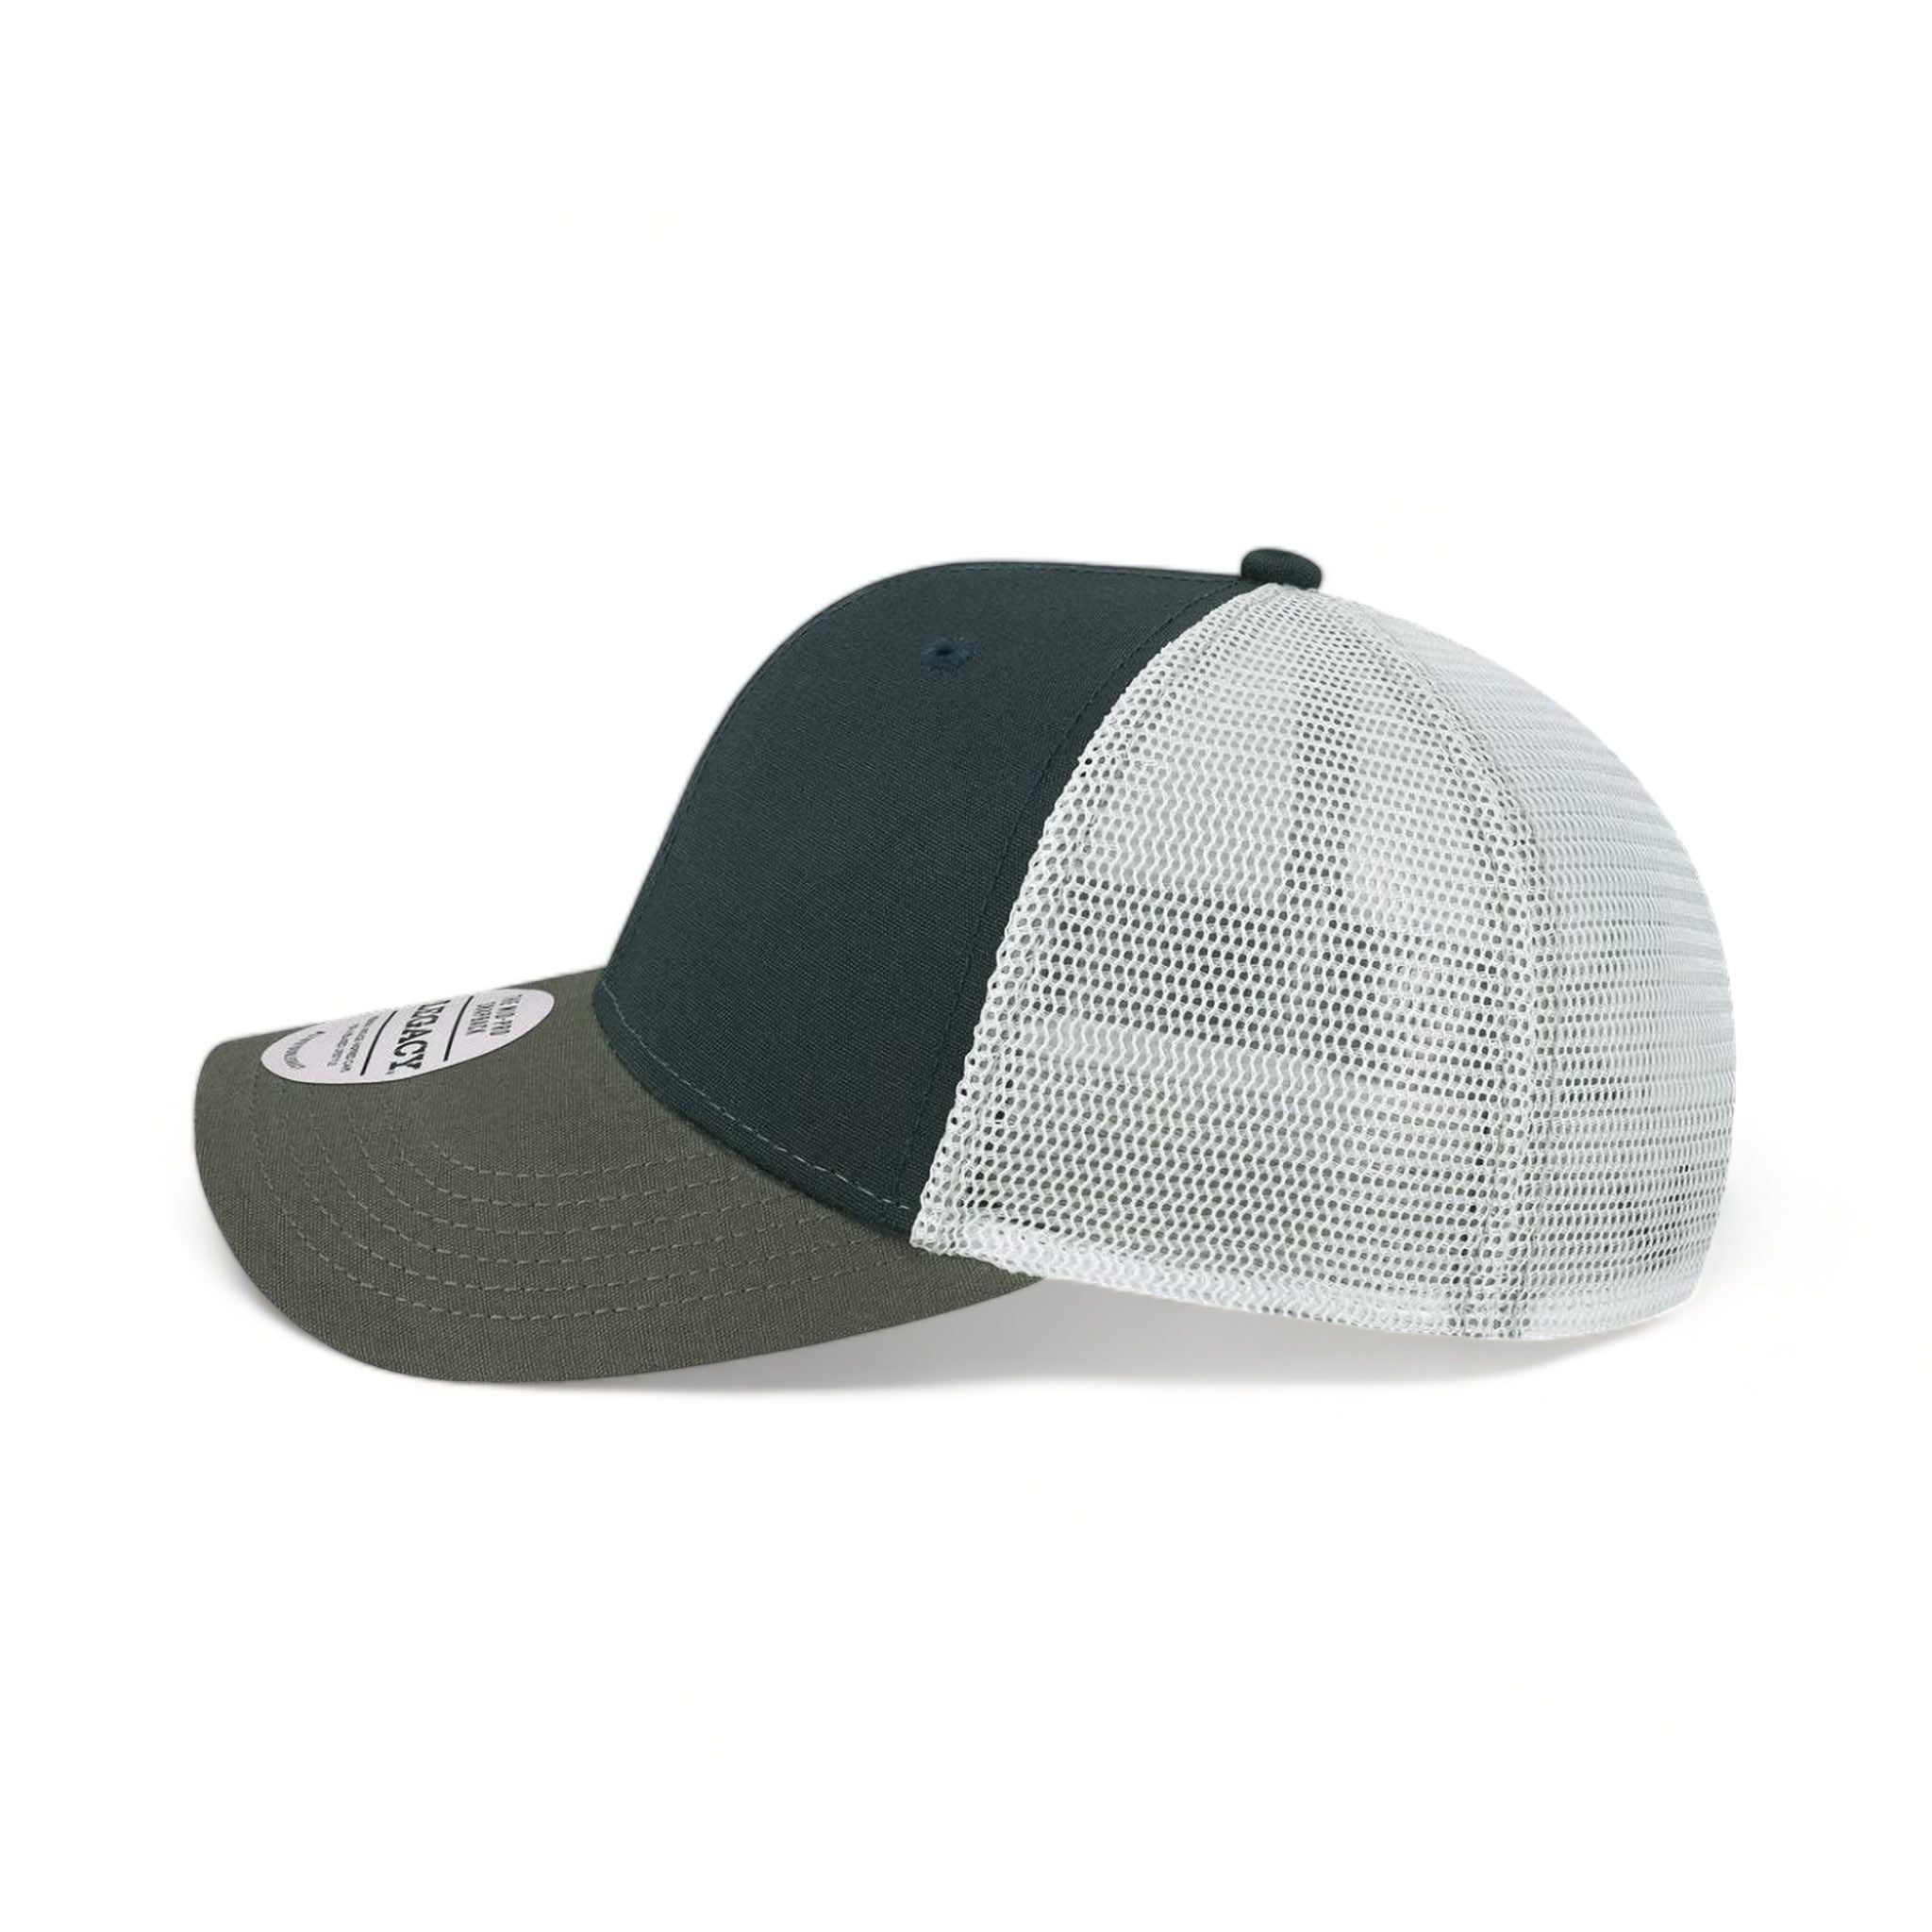 Side view of LEGACY MPS custom hat in navy, dark grey and silver